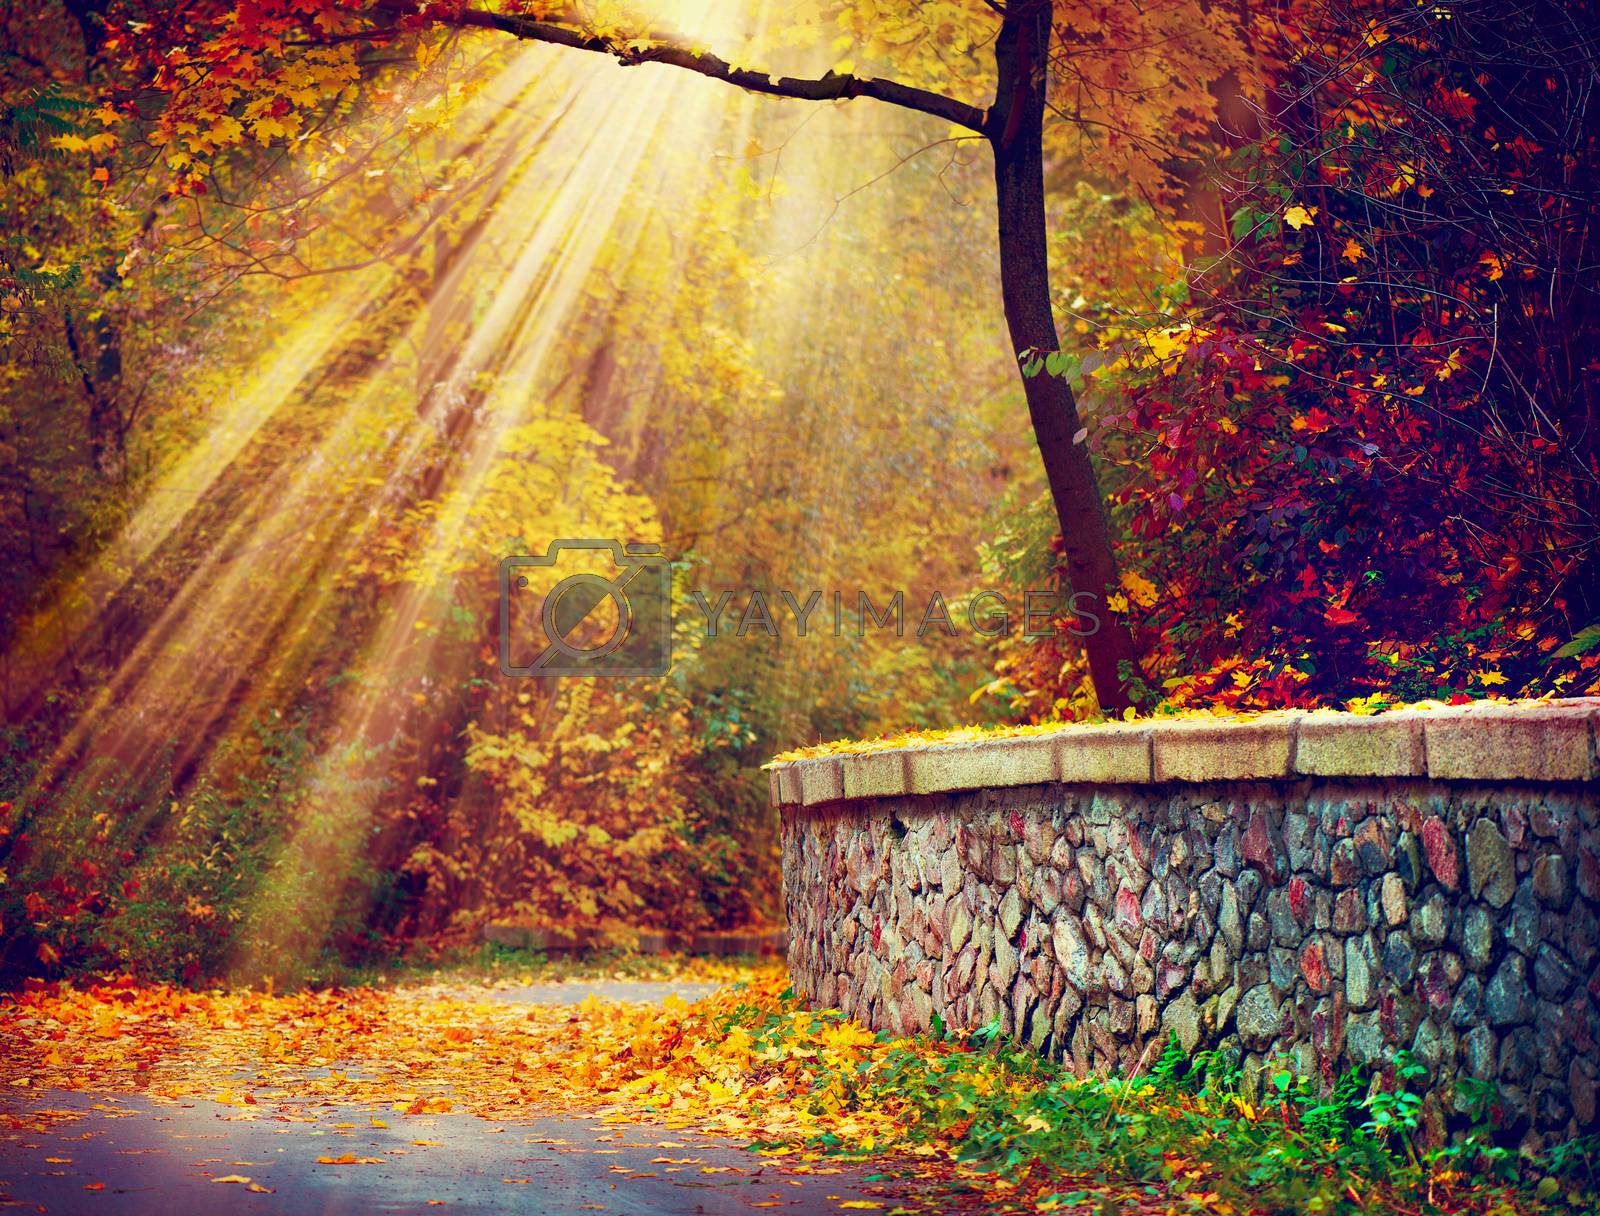 Royalty free image of Fall. Autumnal Park. Autumn Trees in Sunlight Rays by SubbotinaA